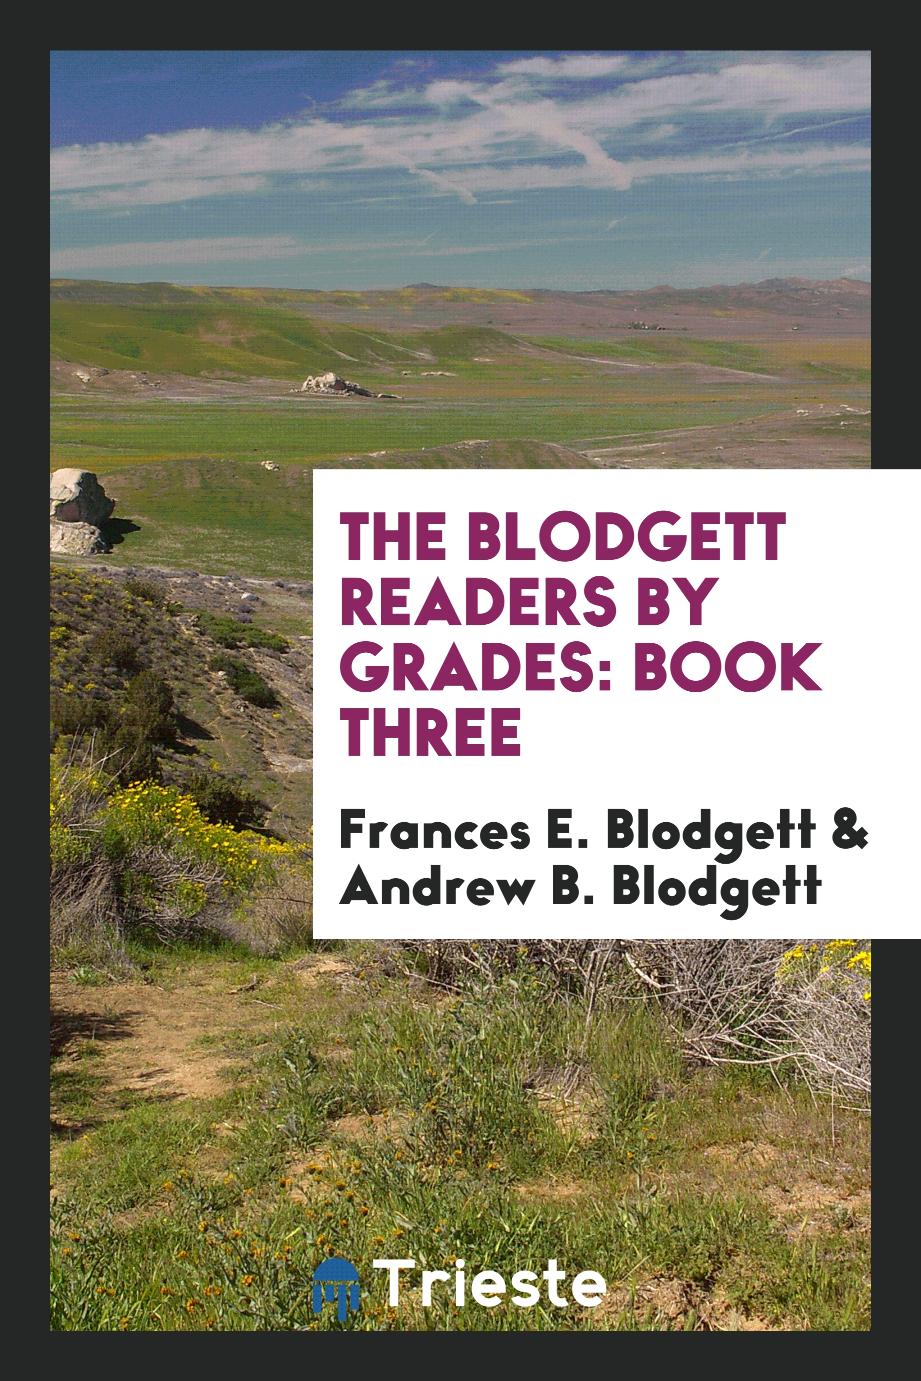 The Blodgett Readers by Grades: Book Three